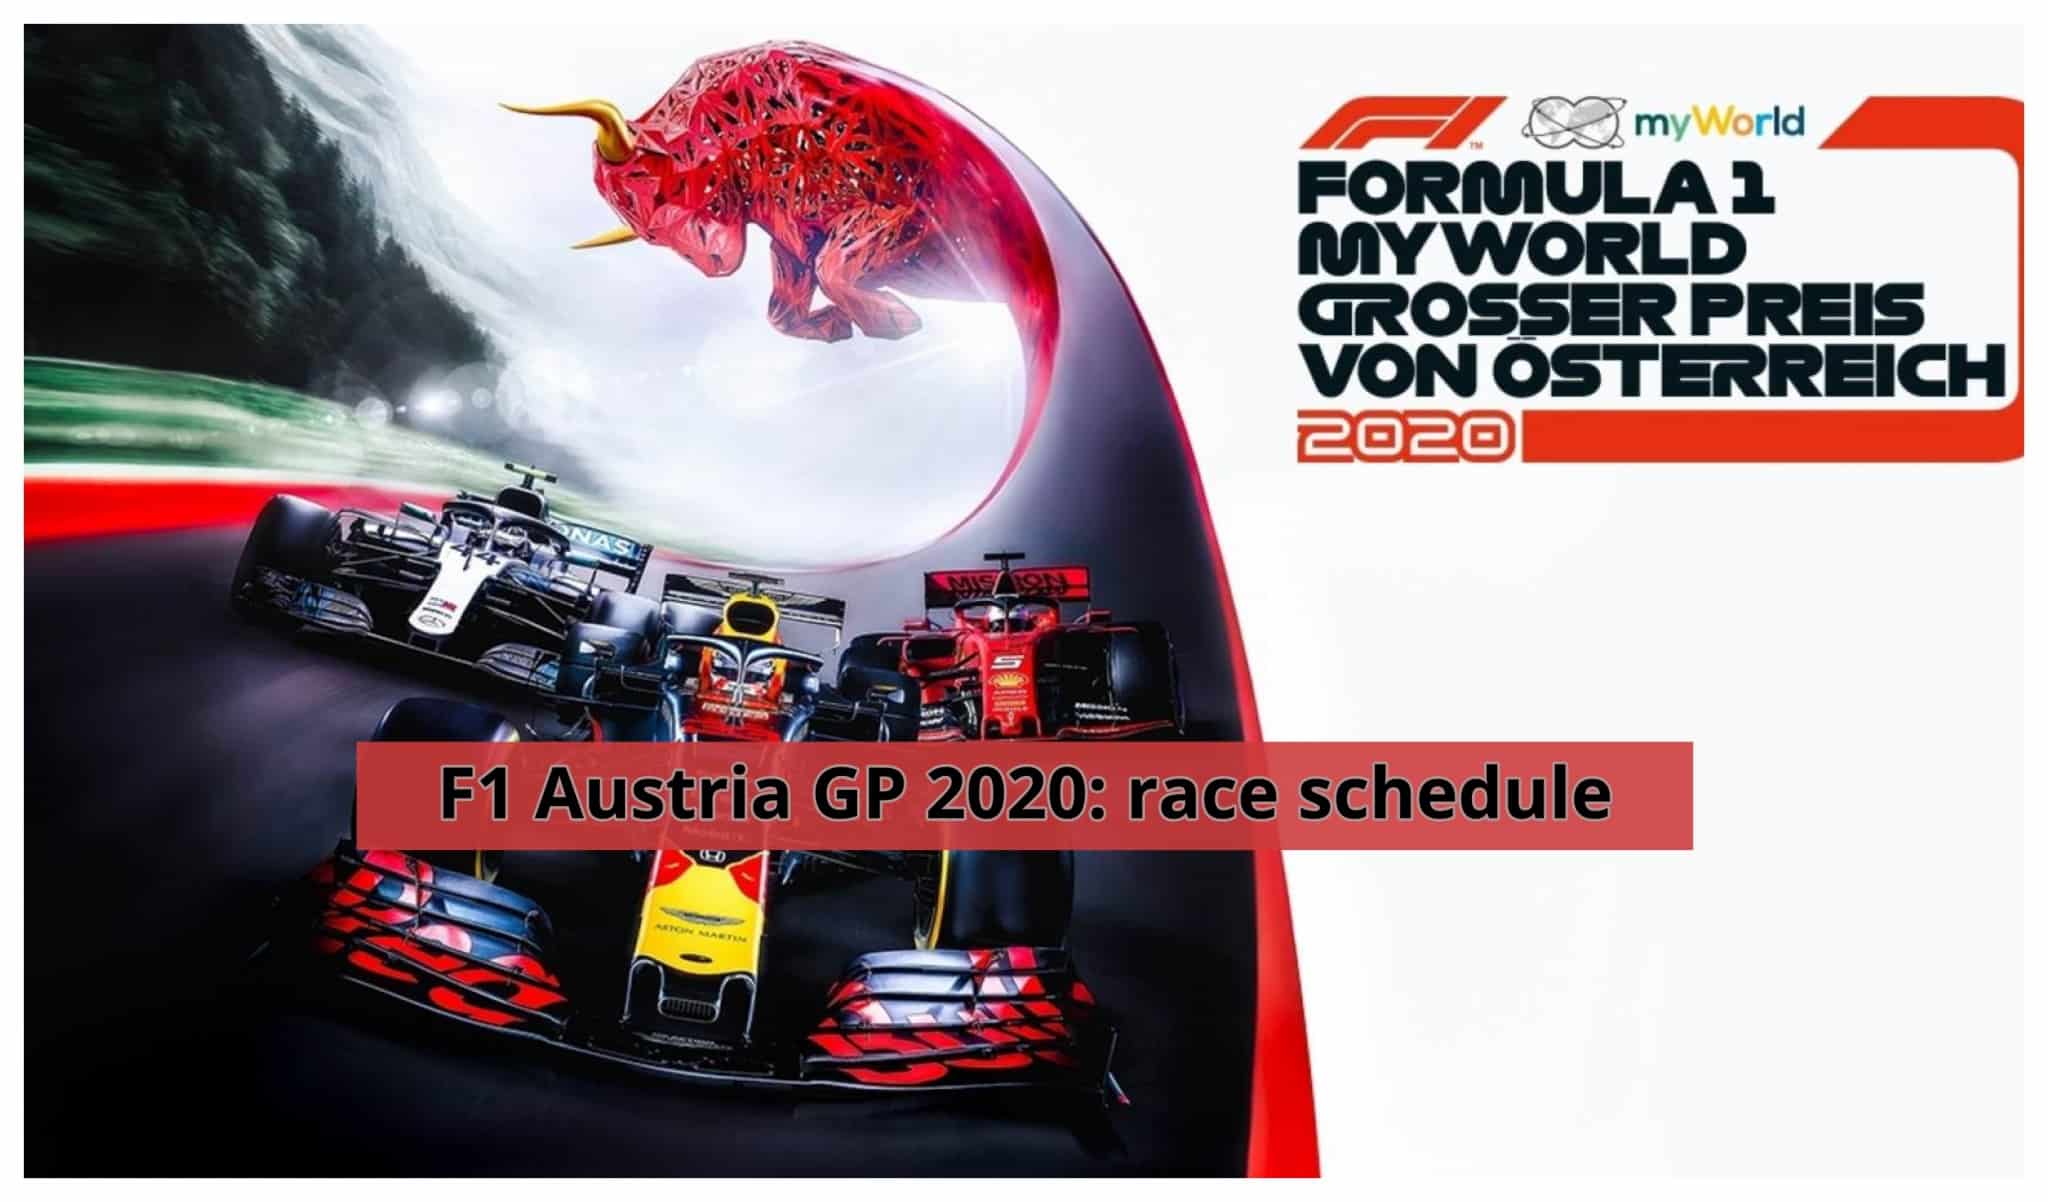 On the Way to Austria GP 2020: race schedule